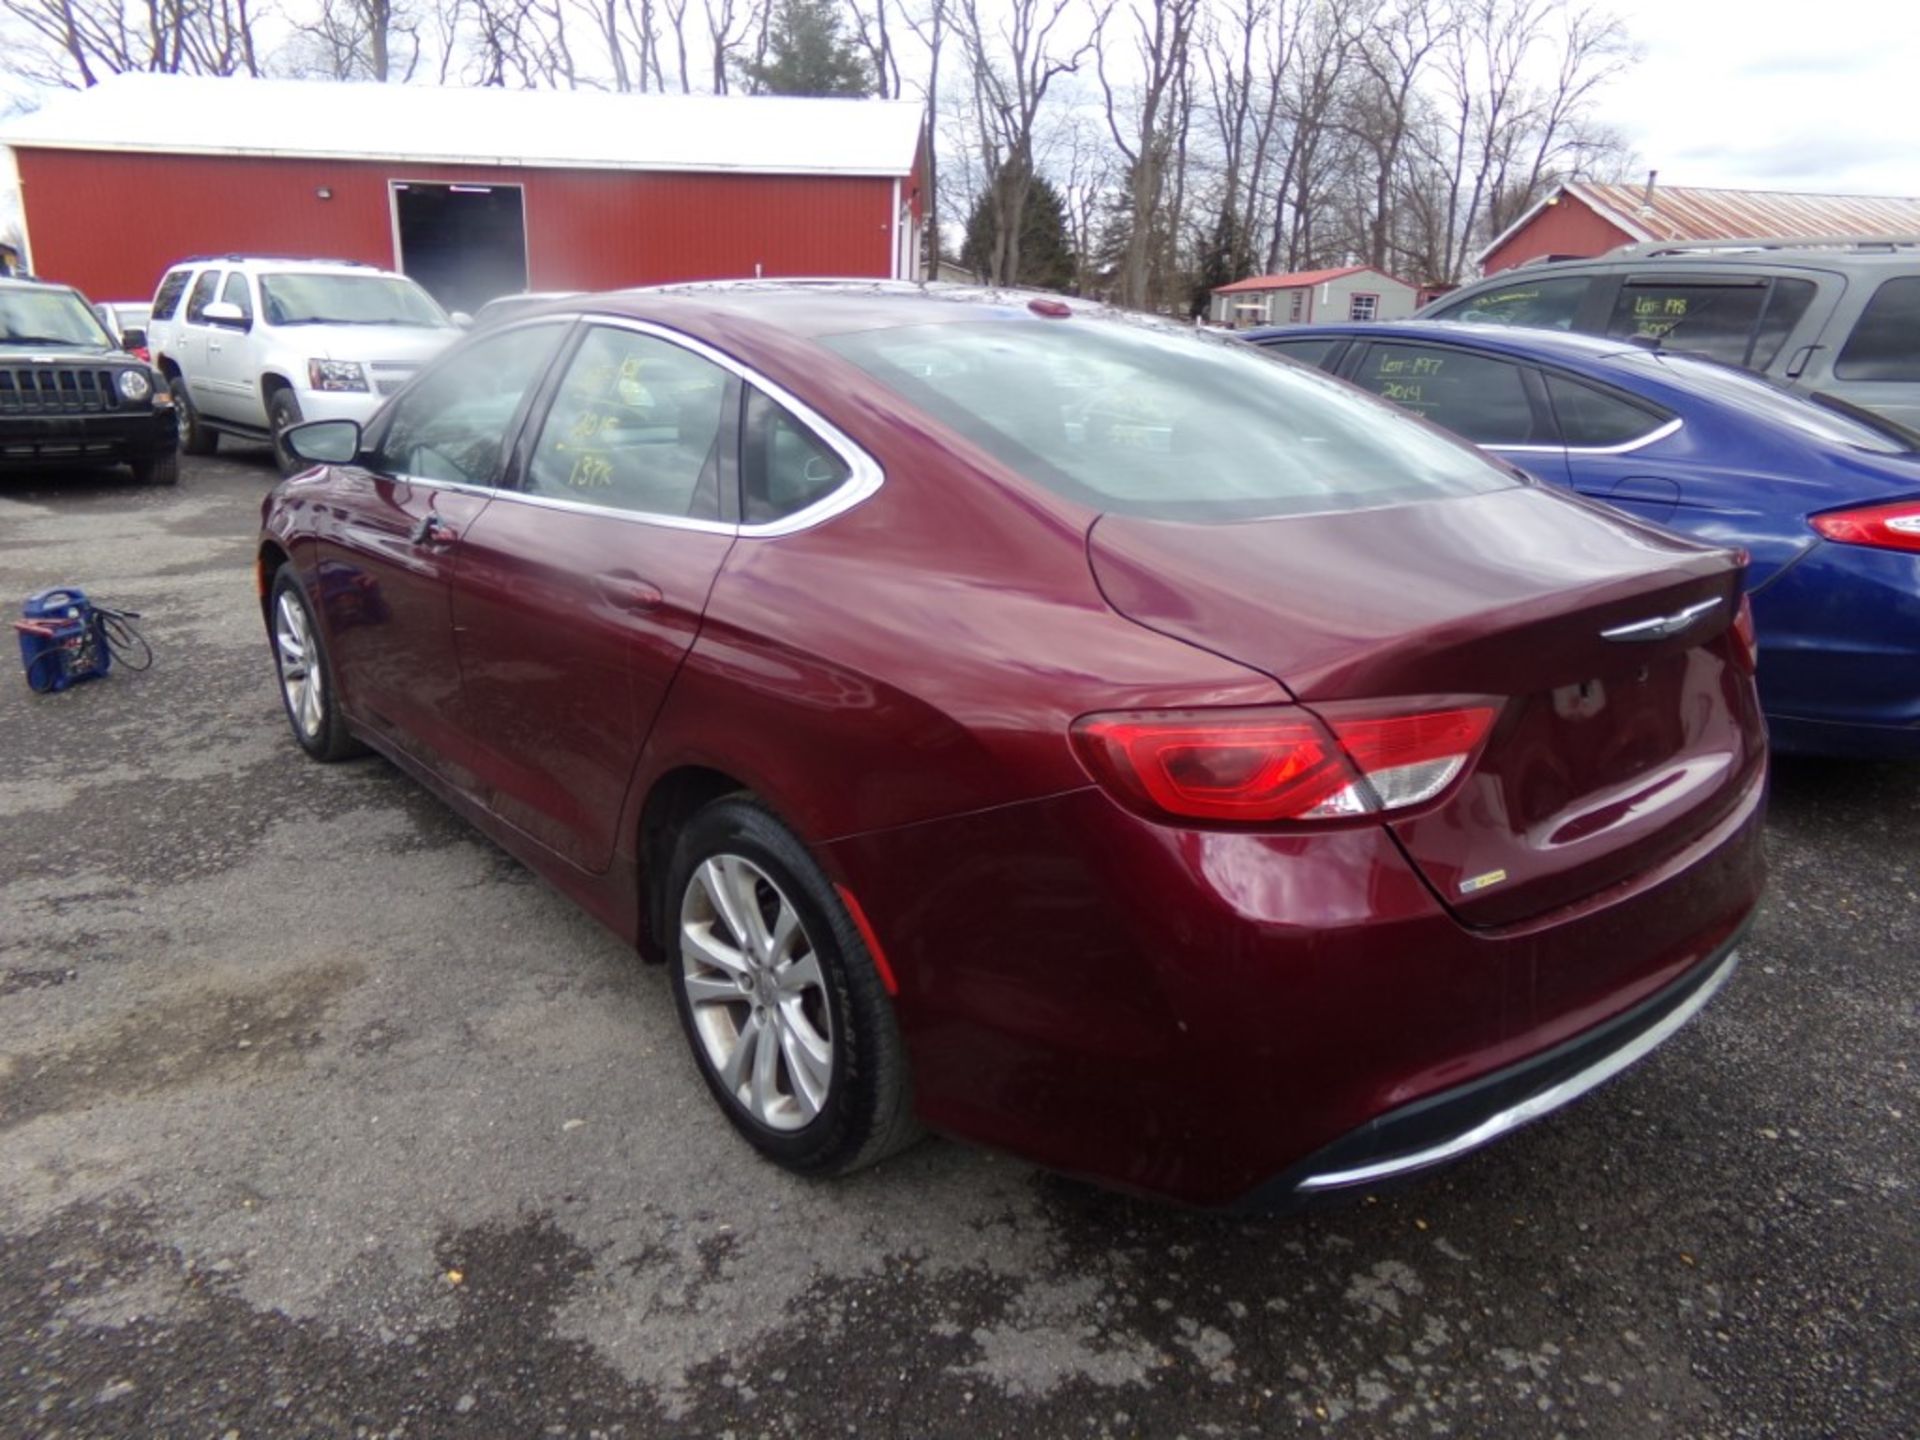 2015 Chrysler 200 Limited, Maroon, 137,543 Miles, VIN# 1C3CCCAB0FN591551, FRONT BUMPER COVER HAS - Image 2 of 8